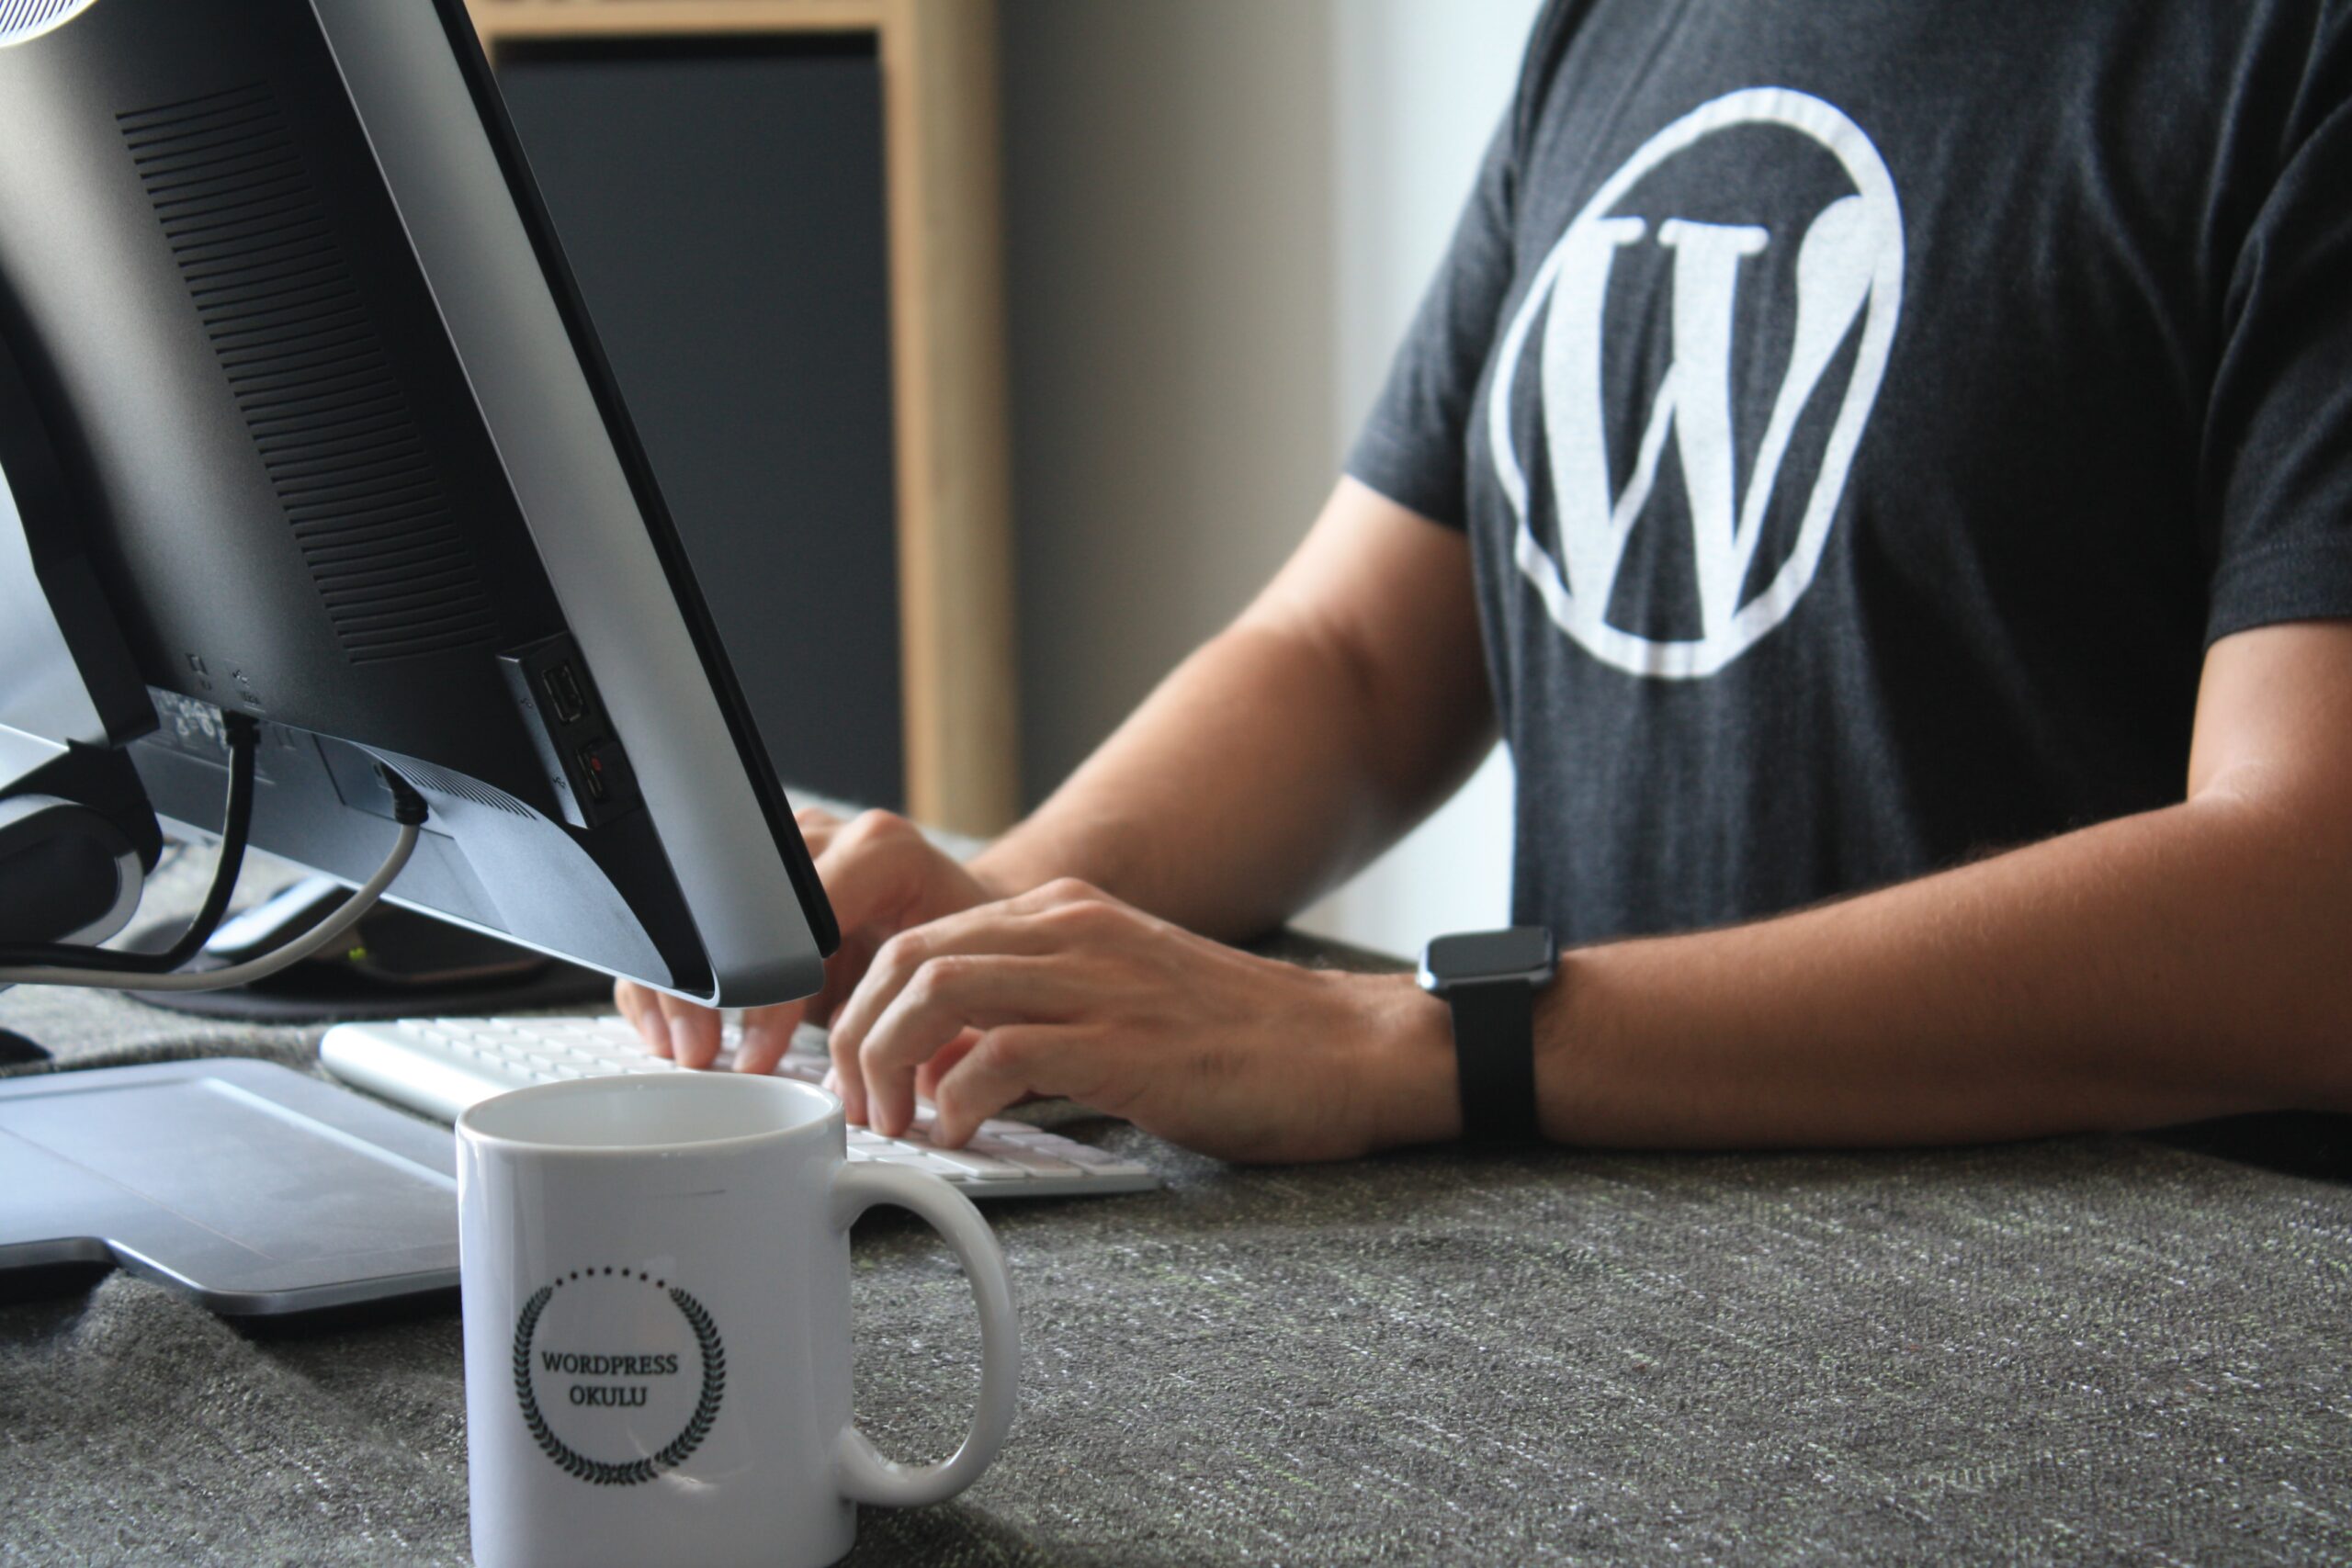 A Beginner’s Guide to WordPress